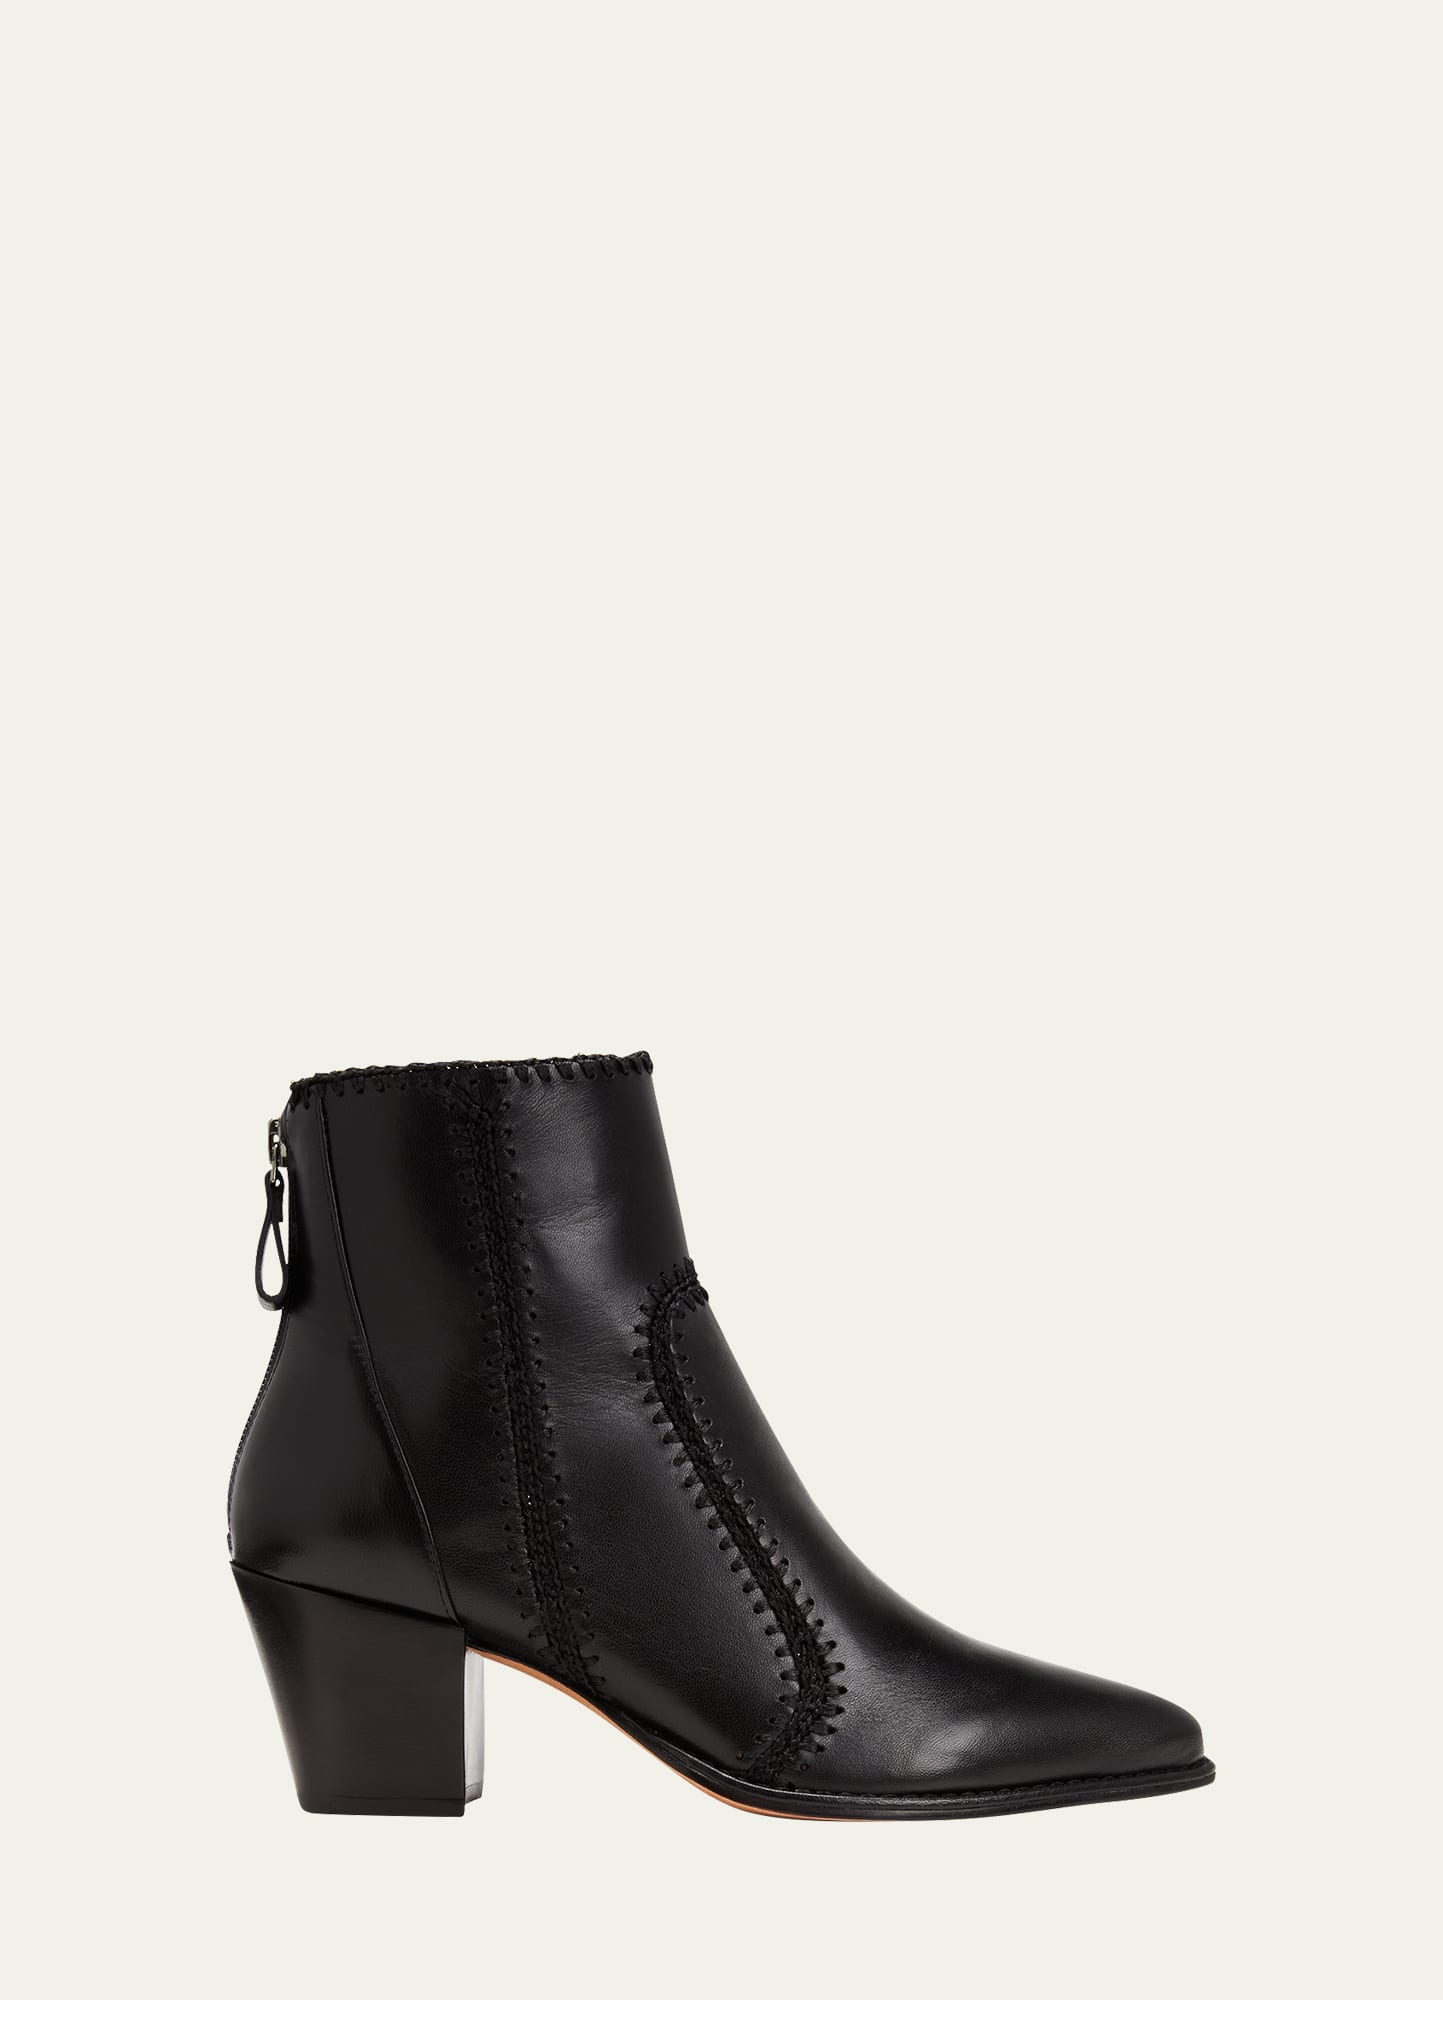 ALAIA Cutout Leather Buckle Ankle Boots - Bergdorf Goodman